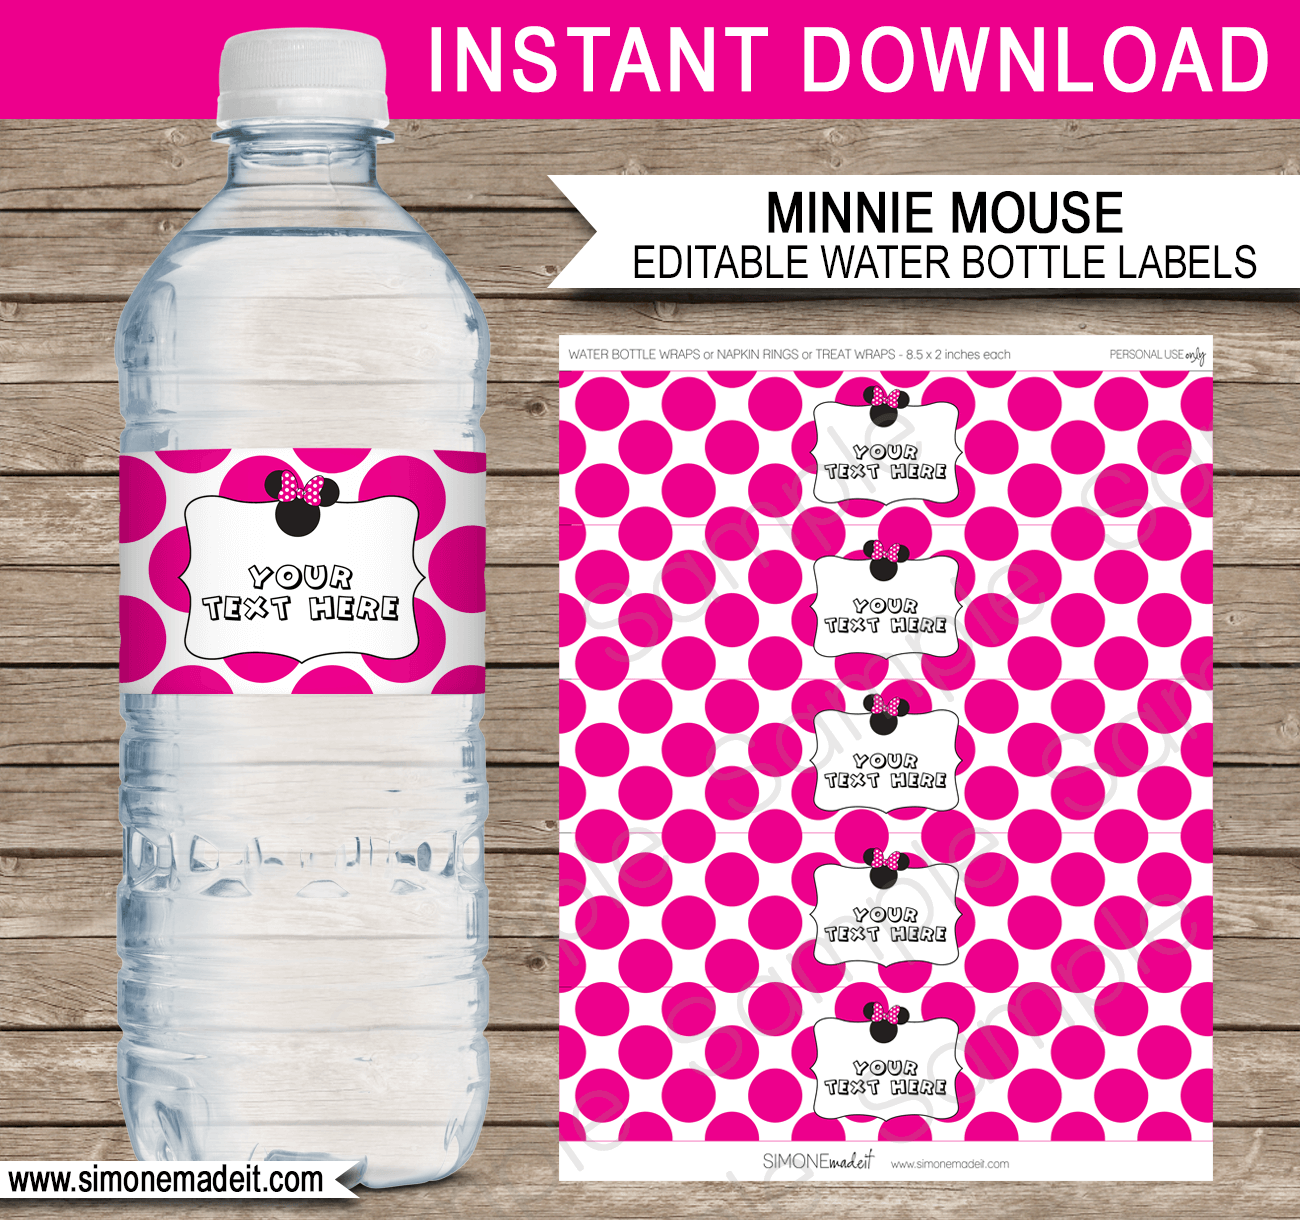 https://www.simonemadeit.com/wp-content/uploads/edd/2017/03/Minnie-Mouse-Party-Water-Bottle-Labels-Printable-Template-pink-2.png